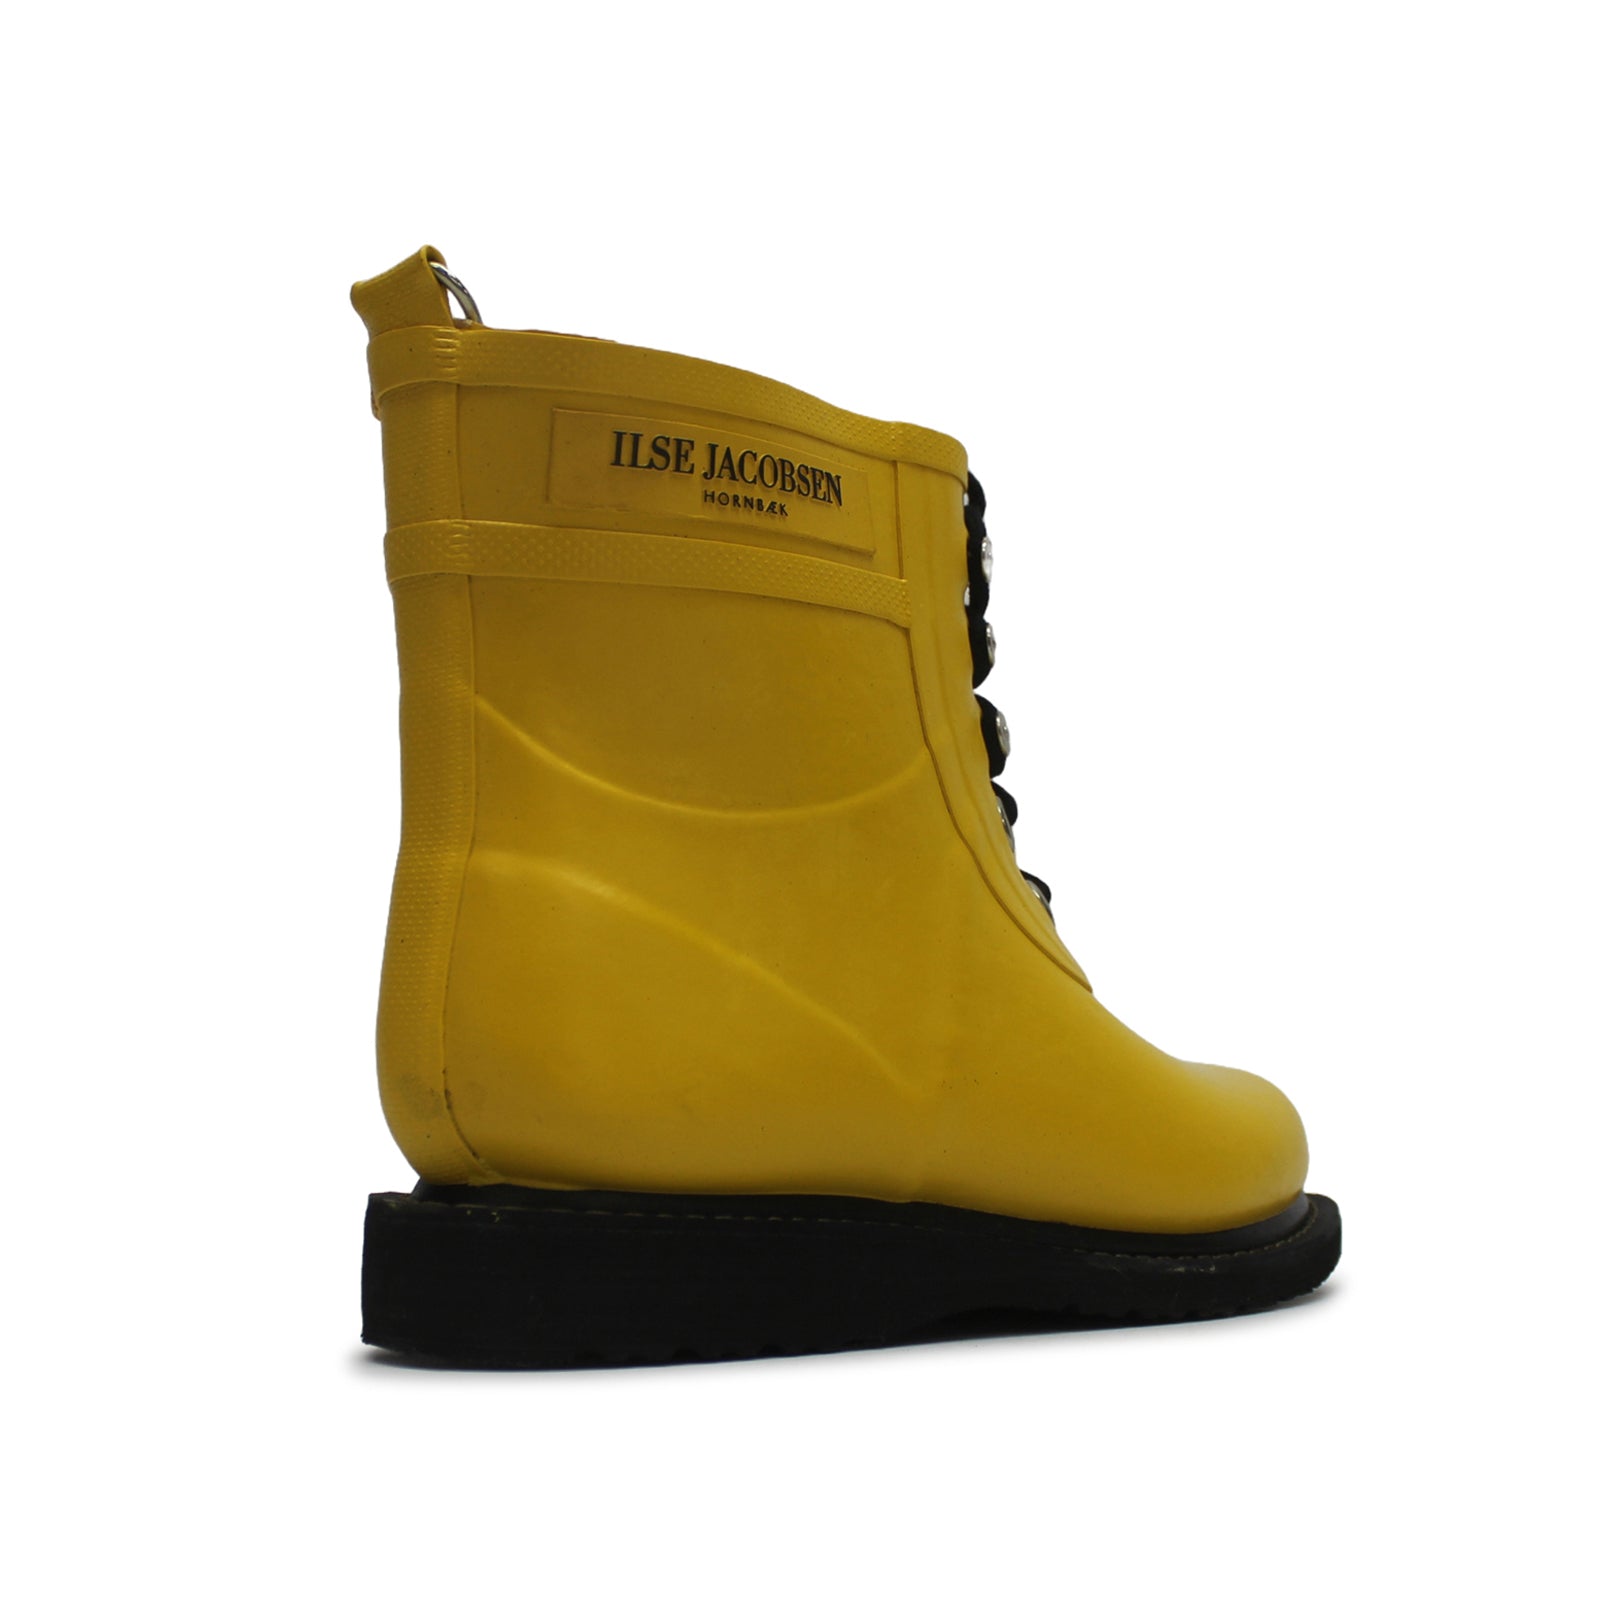 Ilse Jacobsen Rub2 Rubber Womens Boots#color_cyber yellow